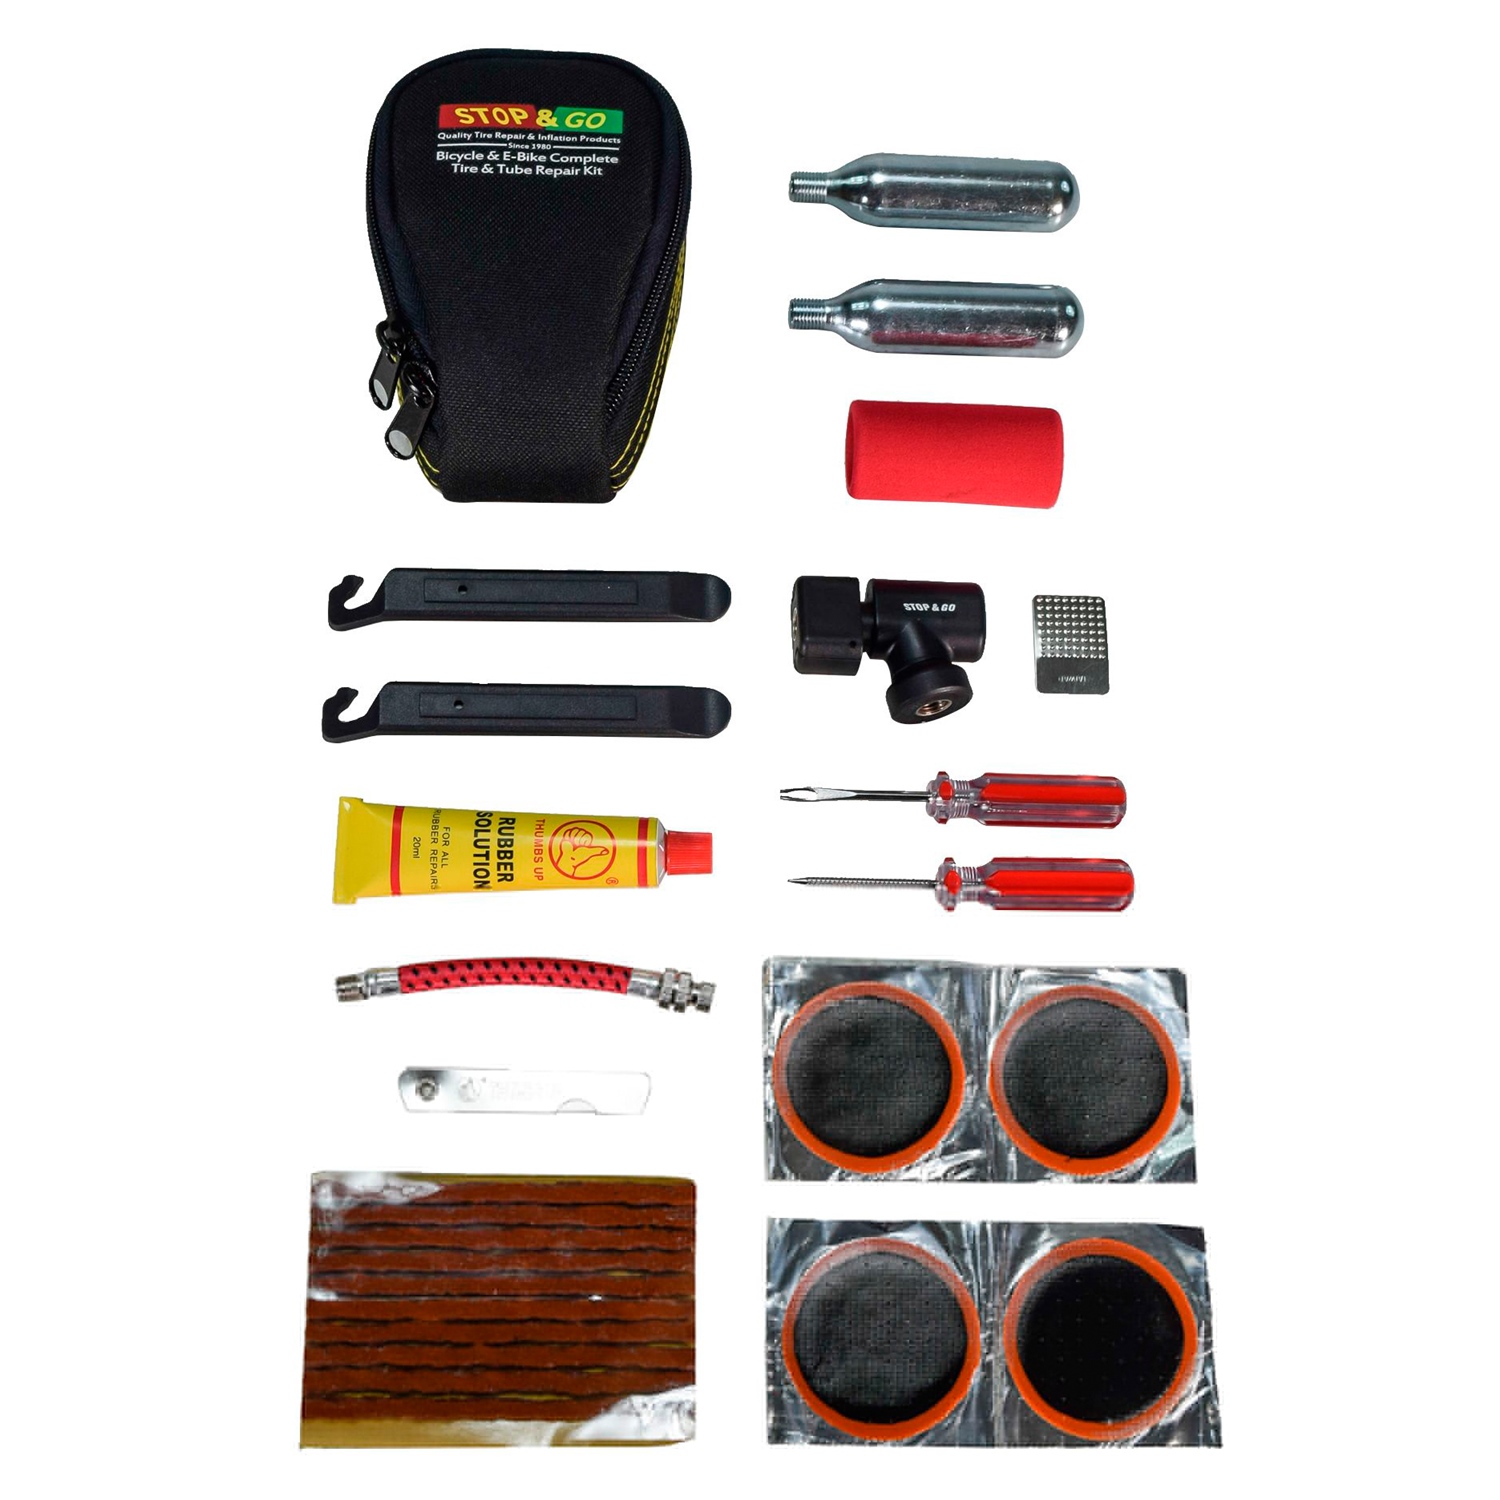 Stop & Go 100 Bicycle Repair & Inflation Kit for Tubeless and Tube-Typ